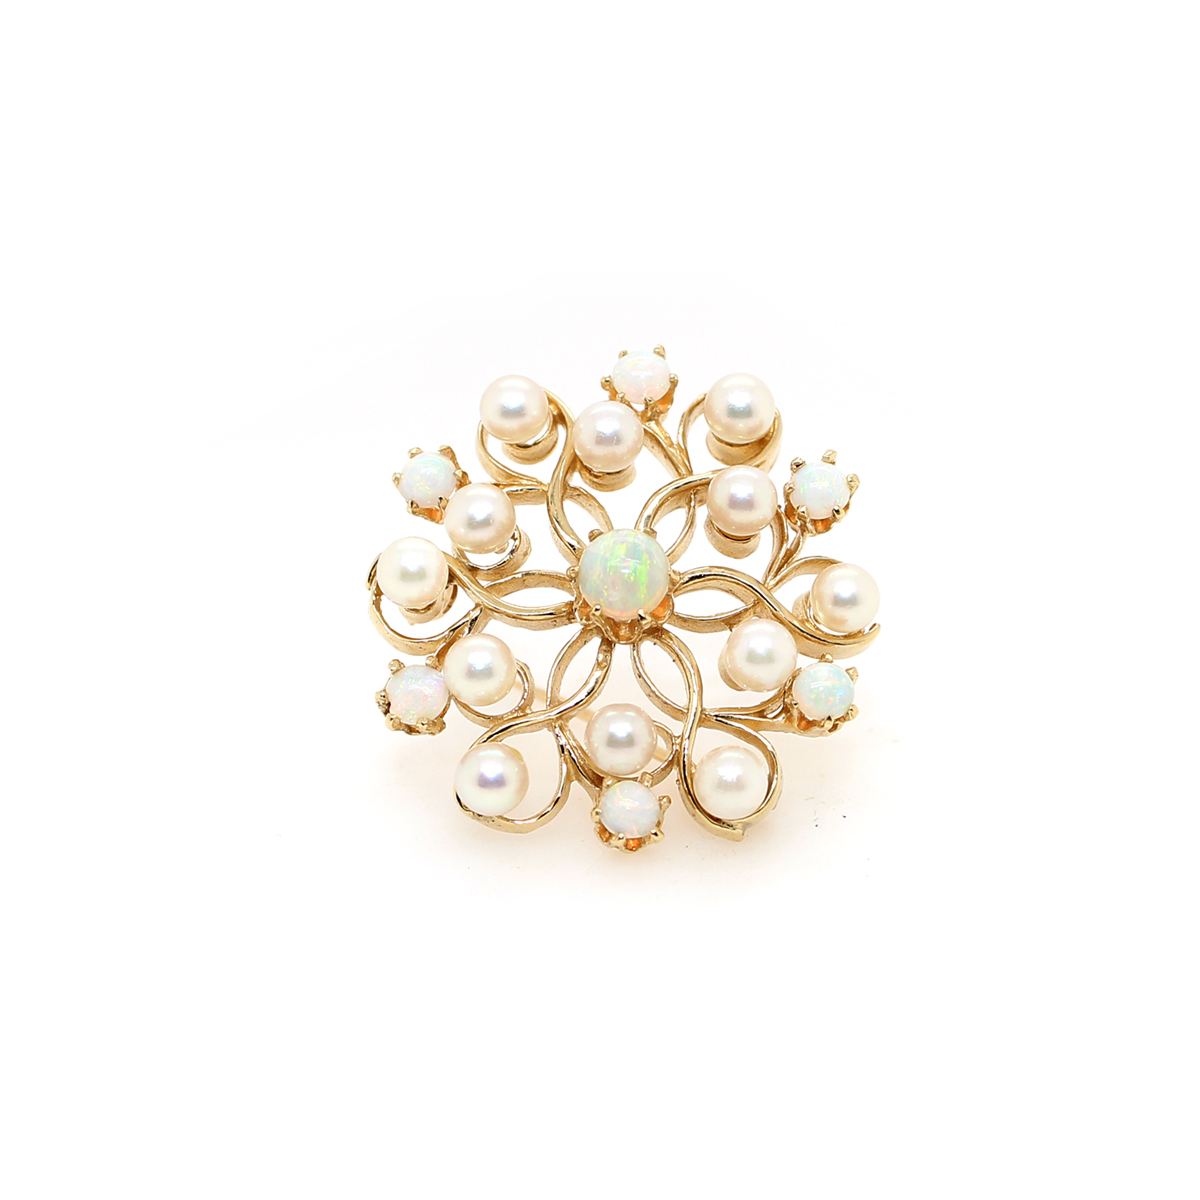 Vintage 14 Karat Yellow Gold Opal and Pearl Brooch